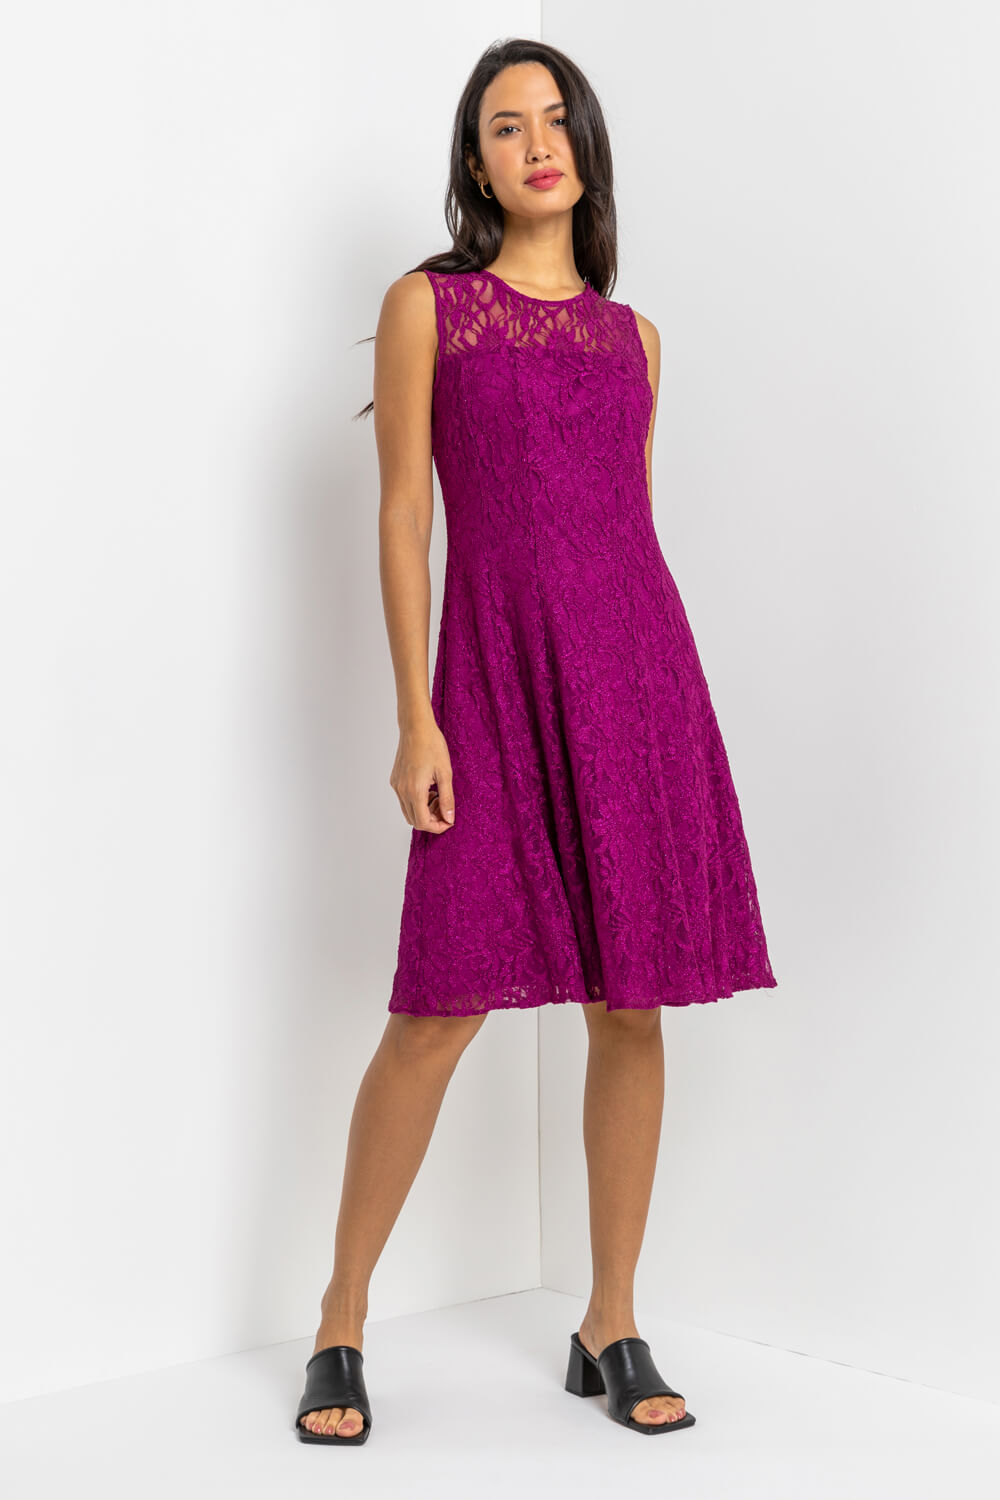 MAGENTA Glitter Lace Fit and Flare Dress , Image 3 of 4